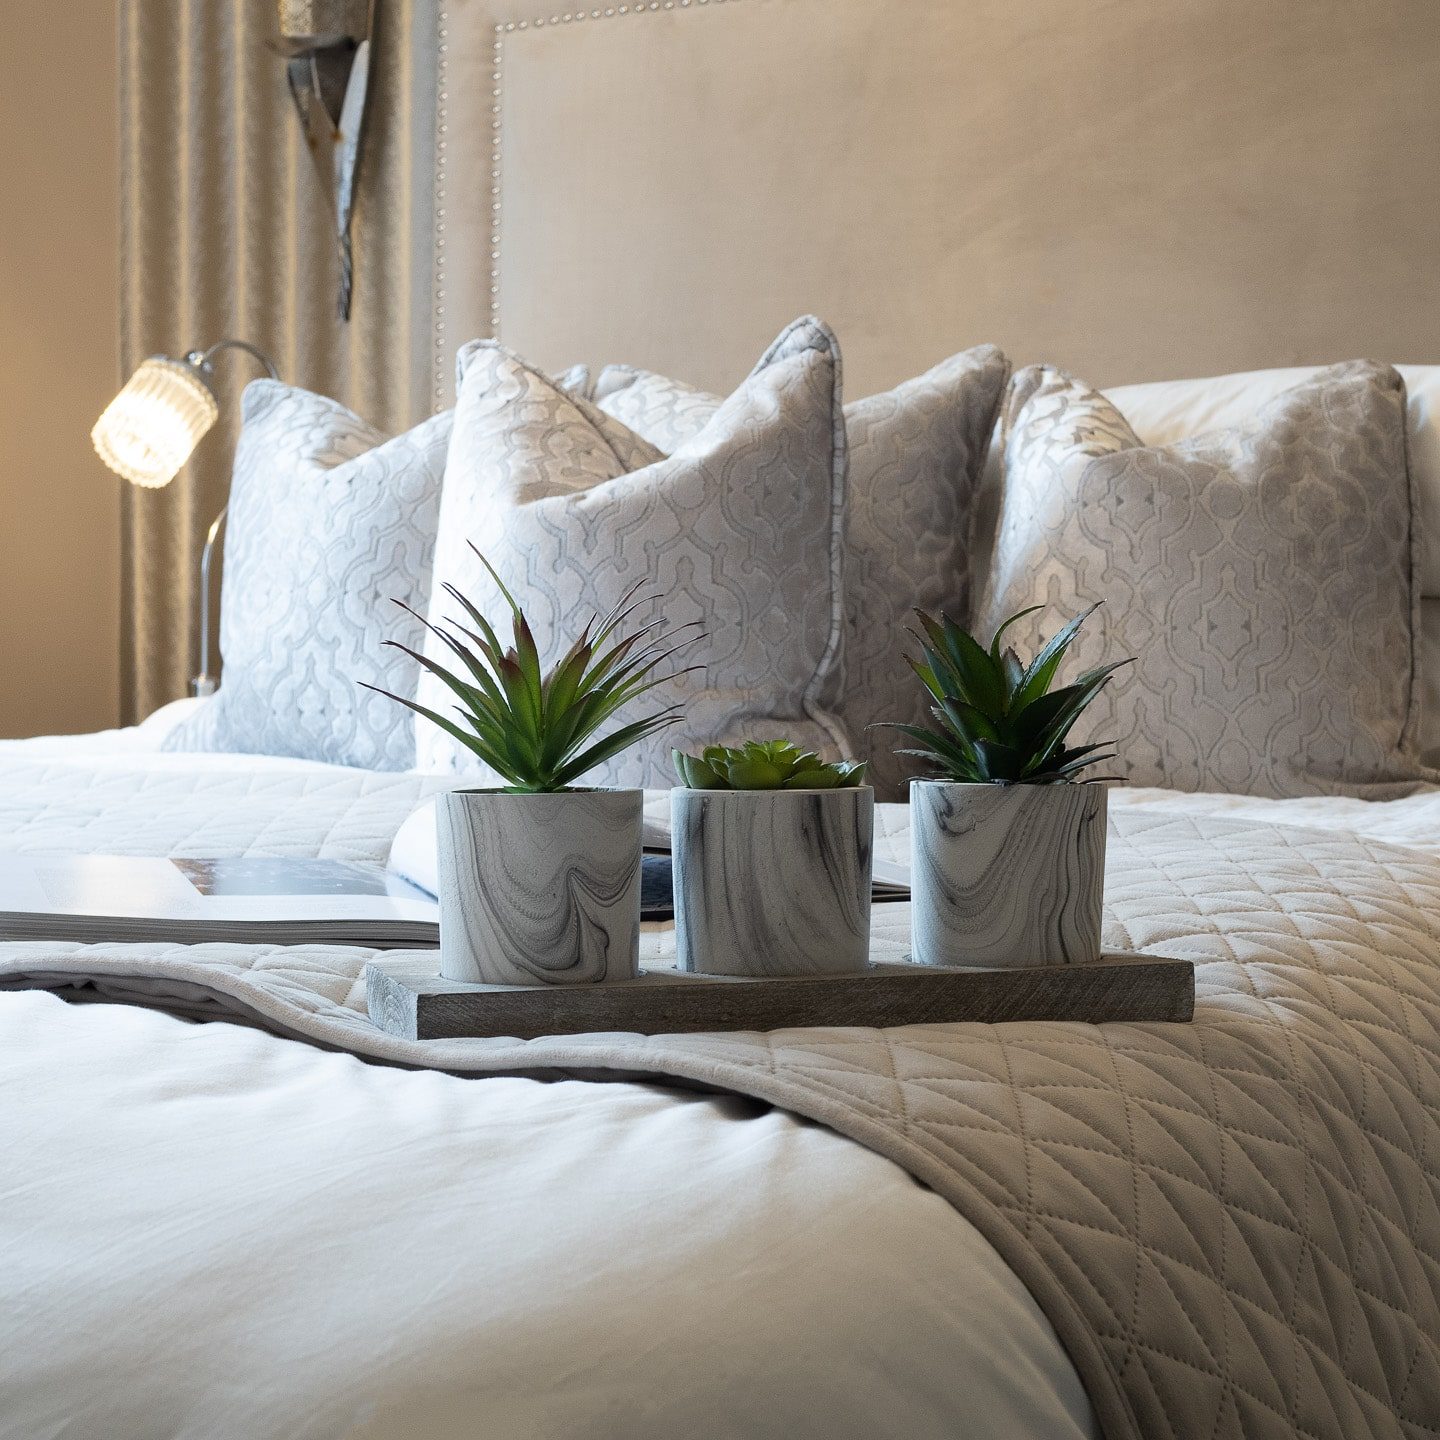 Plants on Bed